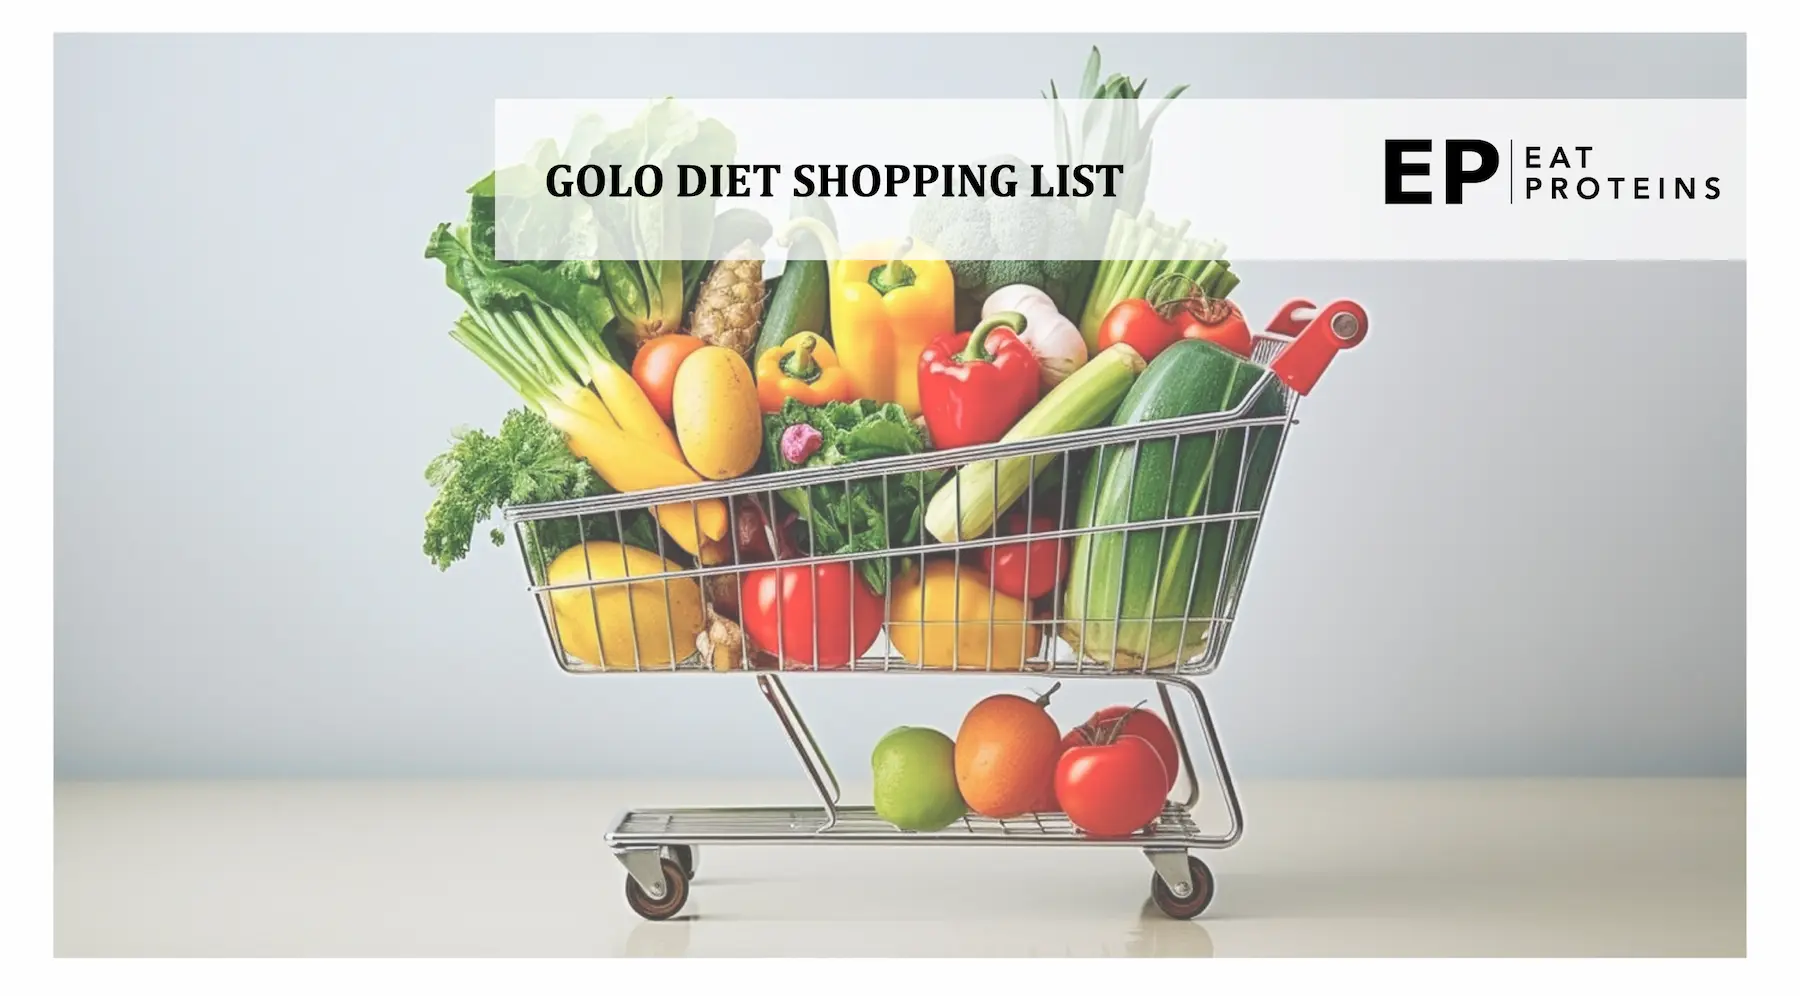 the grocery list for GOLO diet